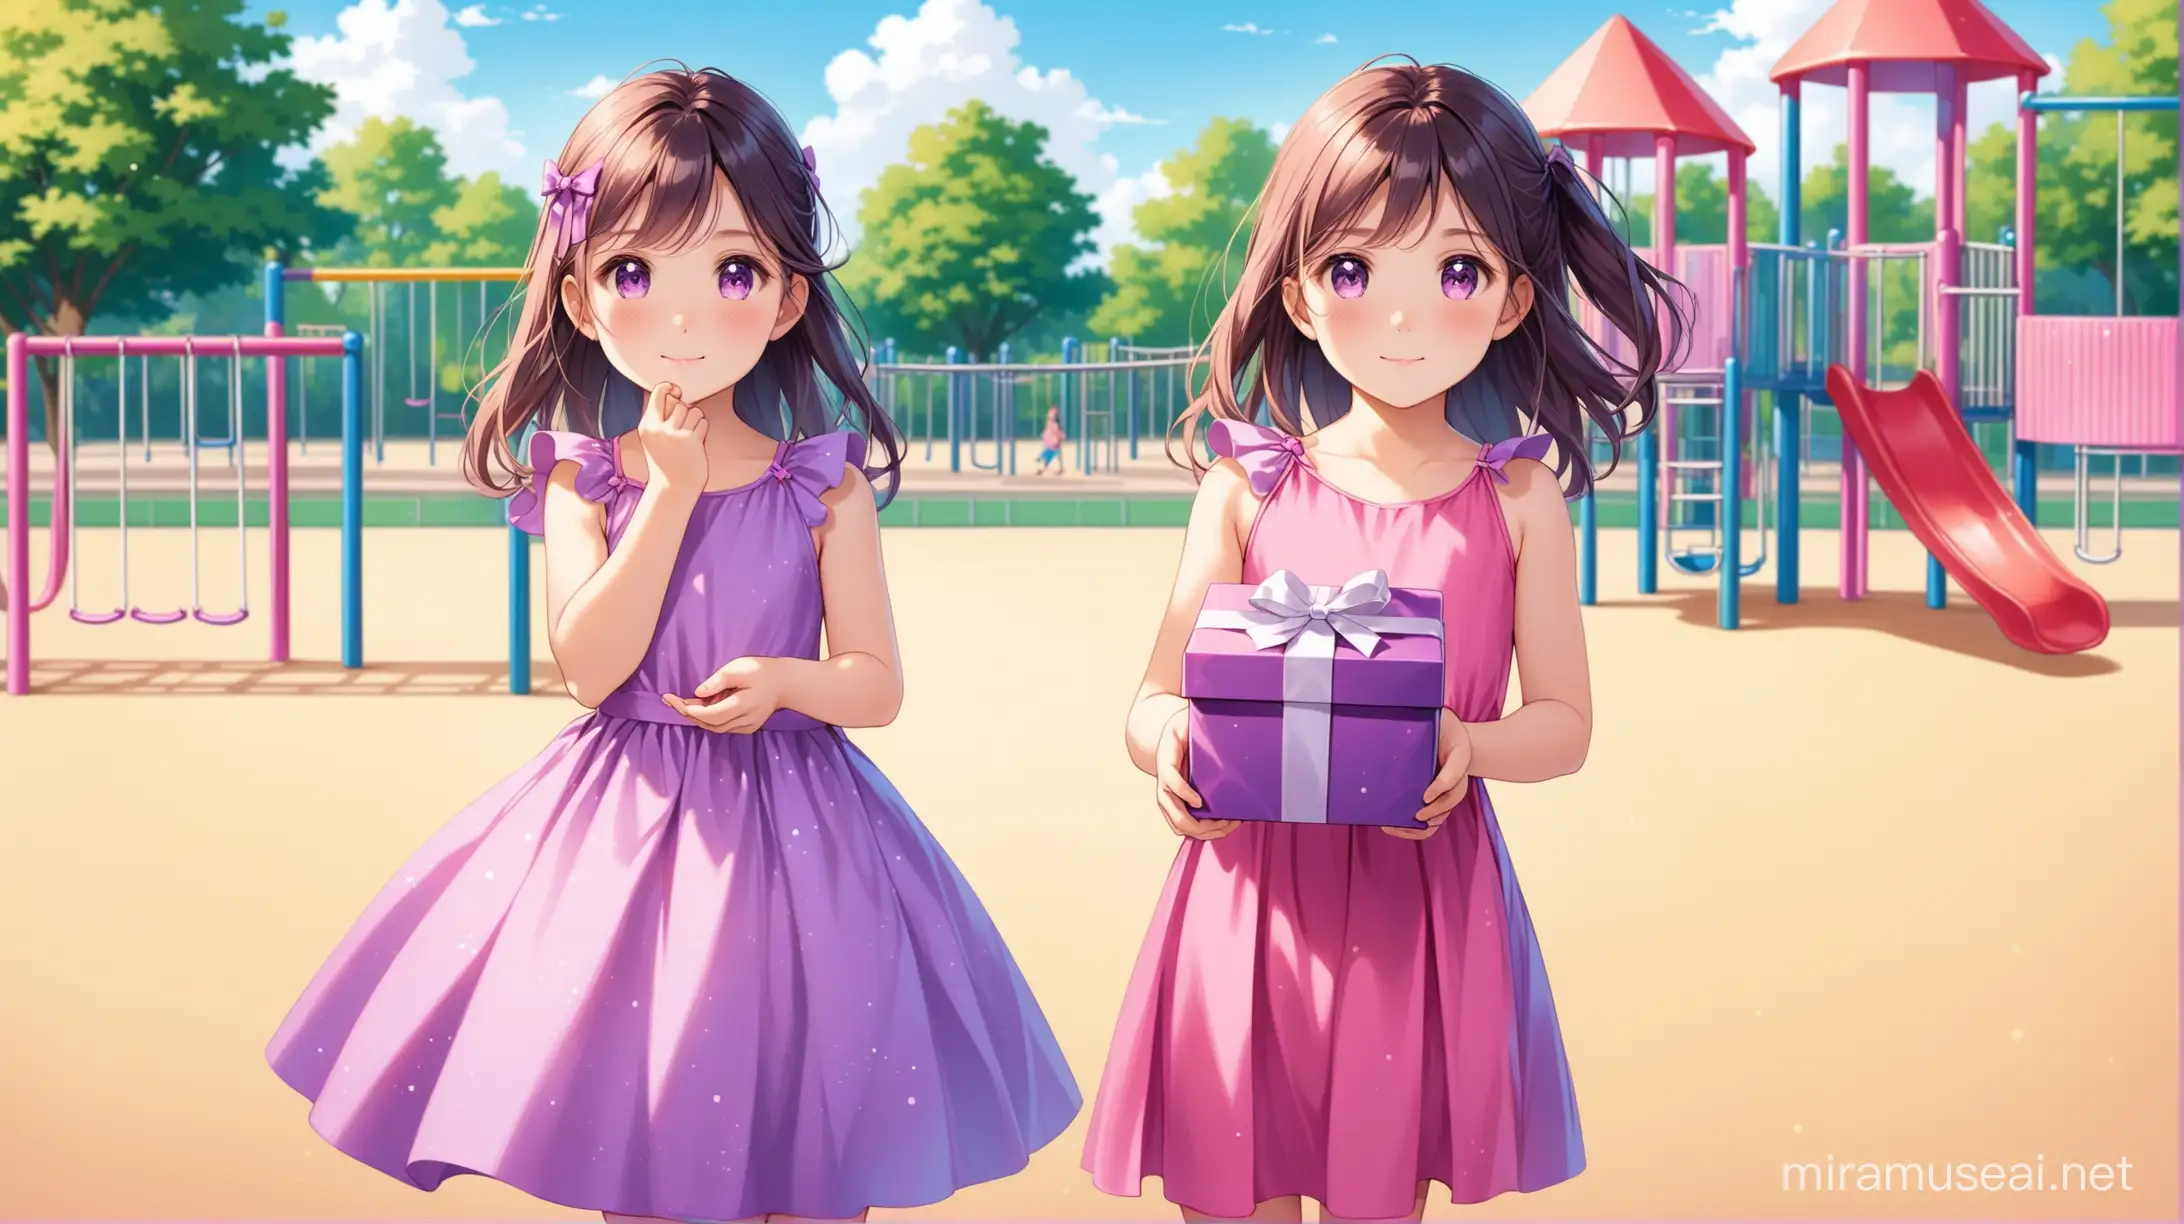 girl of seven years standing face on in a pink and purple dress, she is holding a birthday present, background is a playground